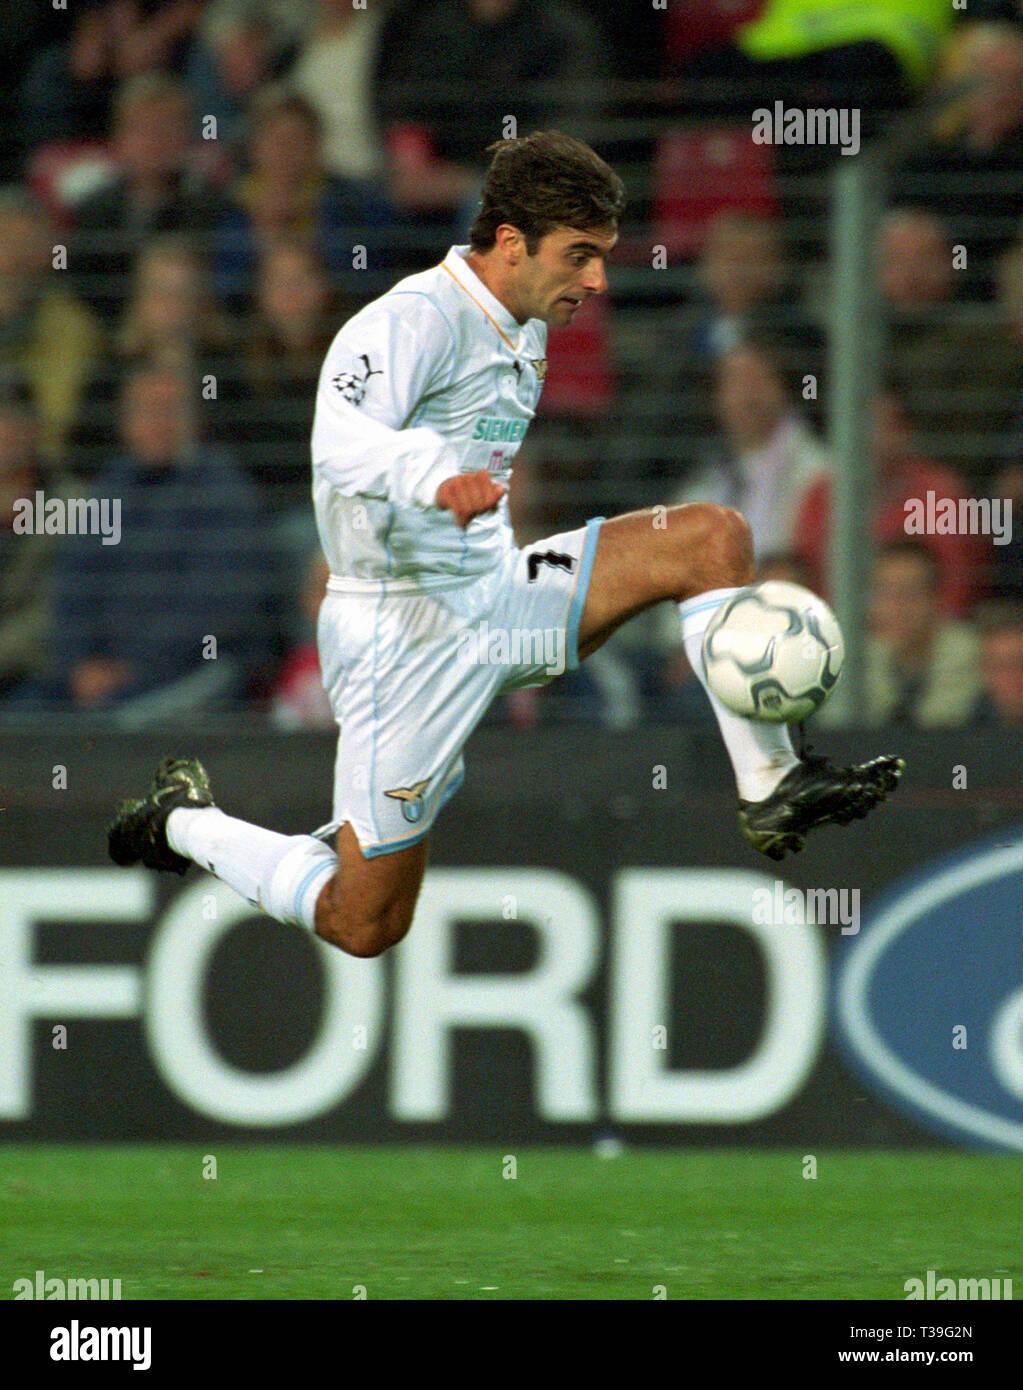 Philips Stadium Eindhoven, Netherlands 26.9.2001, UEFA Champions League season 2001/02 first group stage,  PSV Eindhoven (PSV, red)) vs Lazio Rom (LZR,white) 1:0 --- Claudio LOPEZ (LZR) Stock Photo